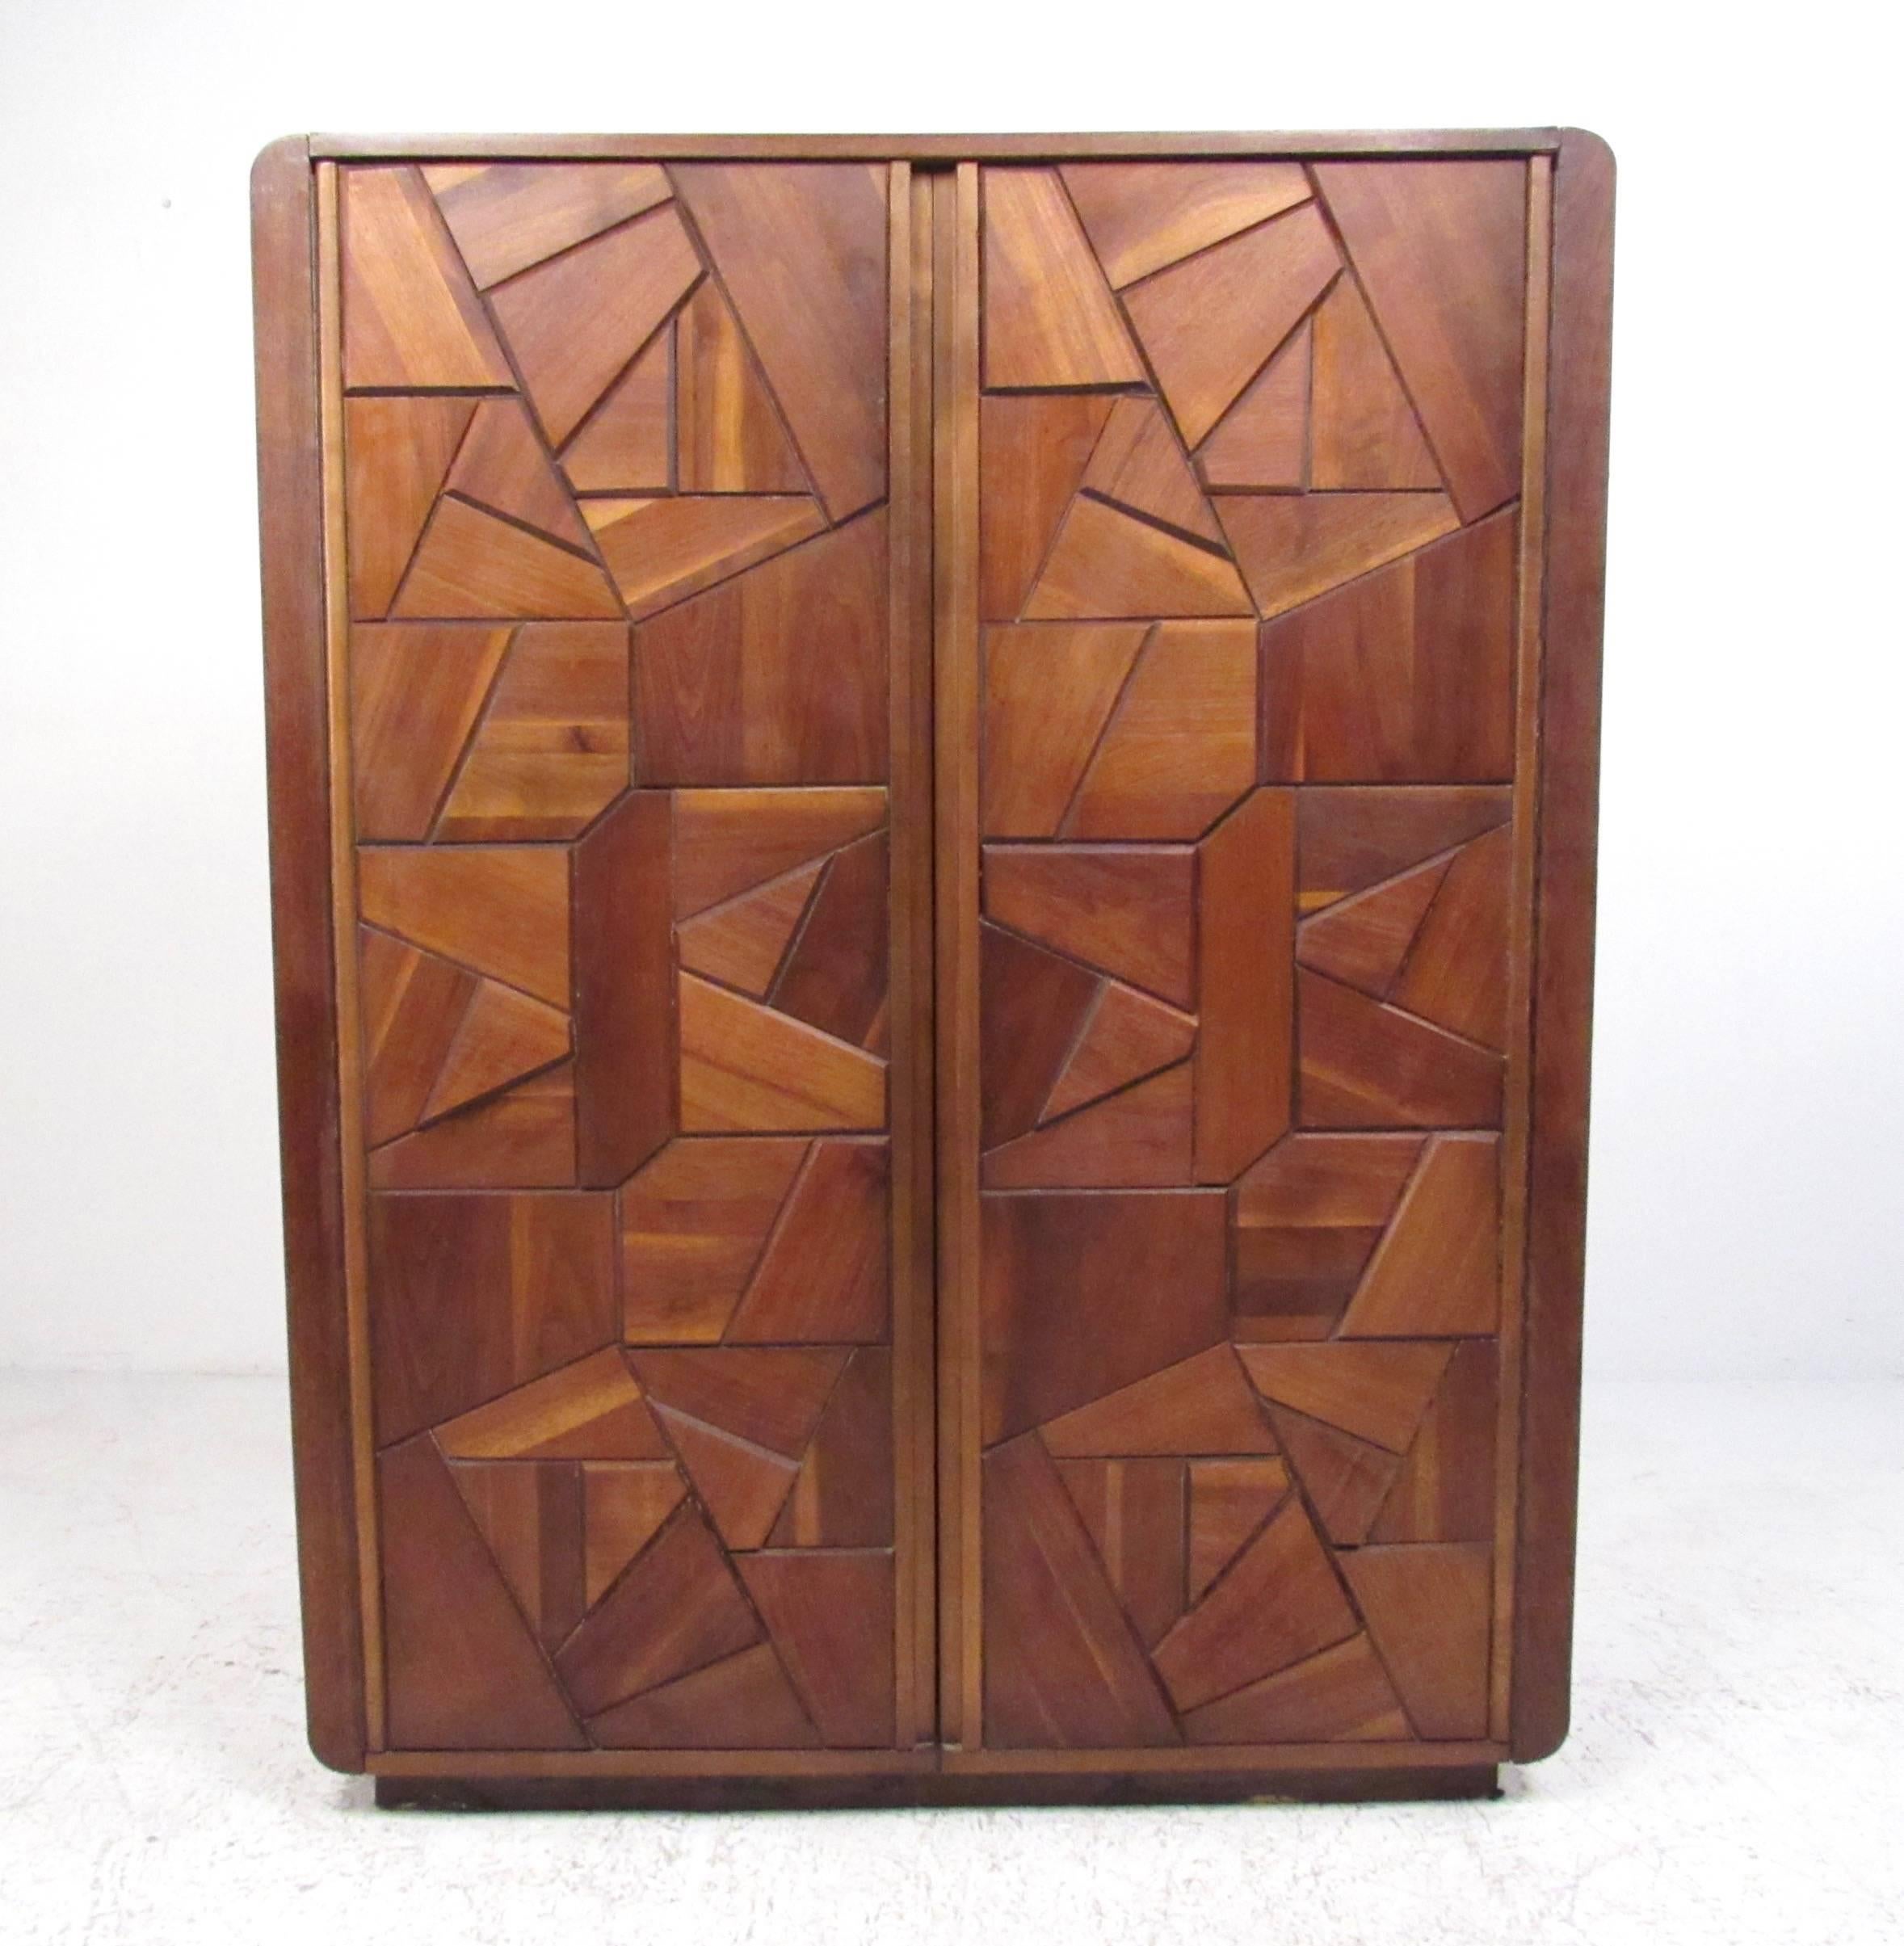 This stylish vintage modern armoire combines shelf storage with spacious drawers for plenty of bedroom storage. Mosaic like sculptural wood front cabinet doors add to the midcentury Brutalist appeal of the piece. Please confirm item location (NY or